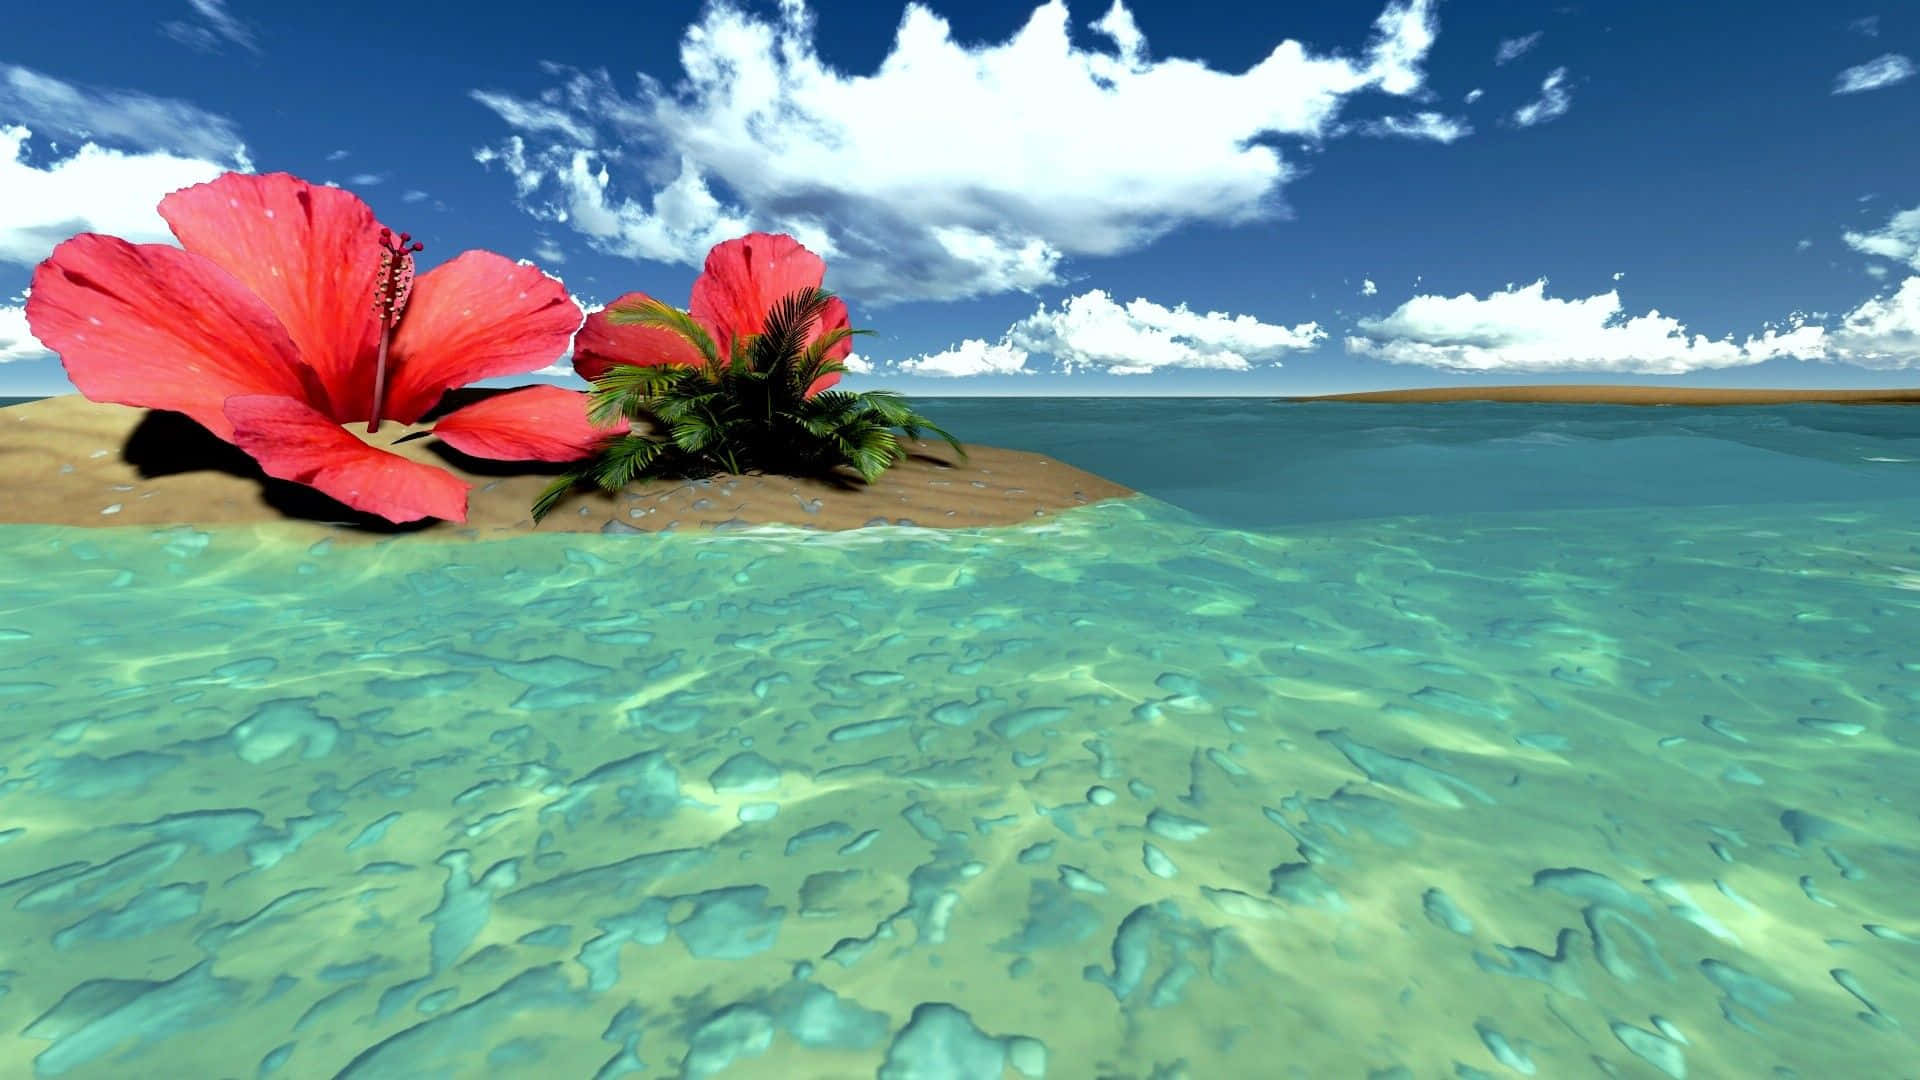 Take a break and enjoy the tranquil beauty of nature. Wallpaper